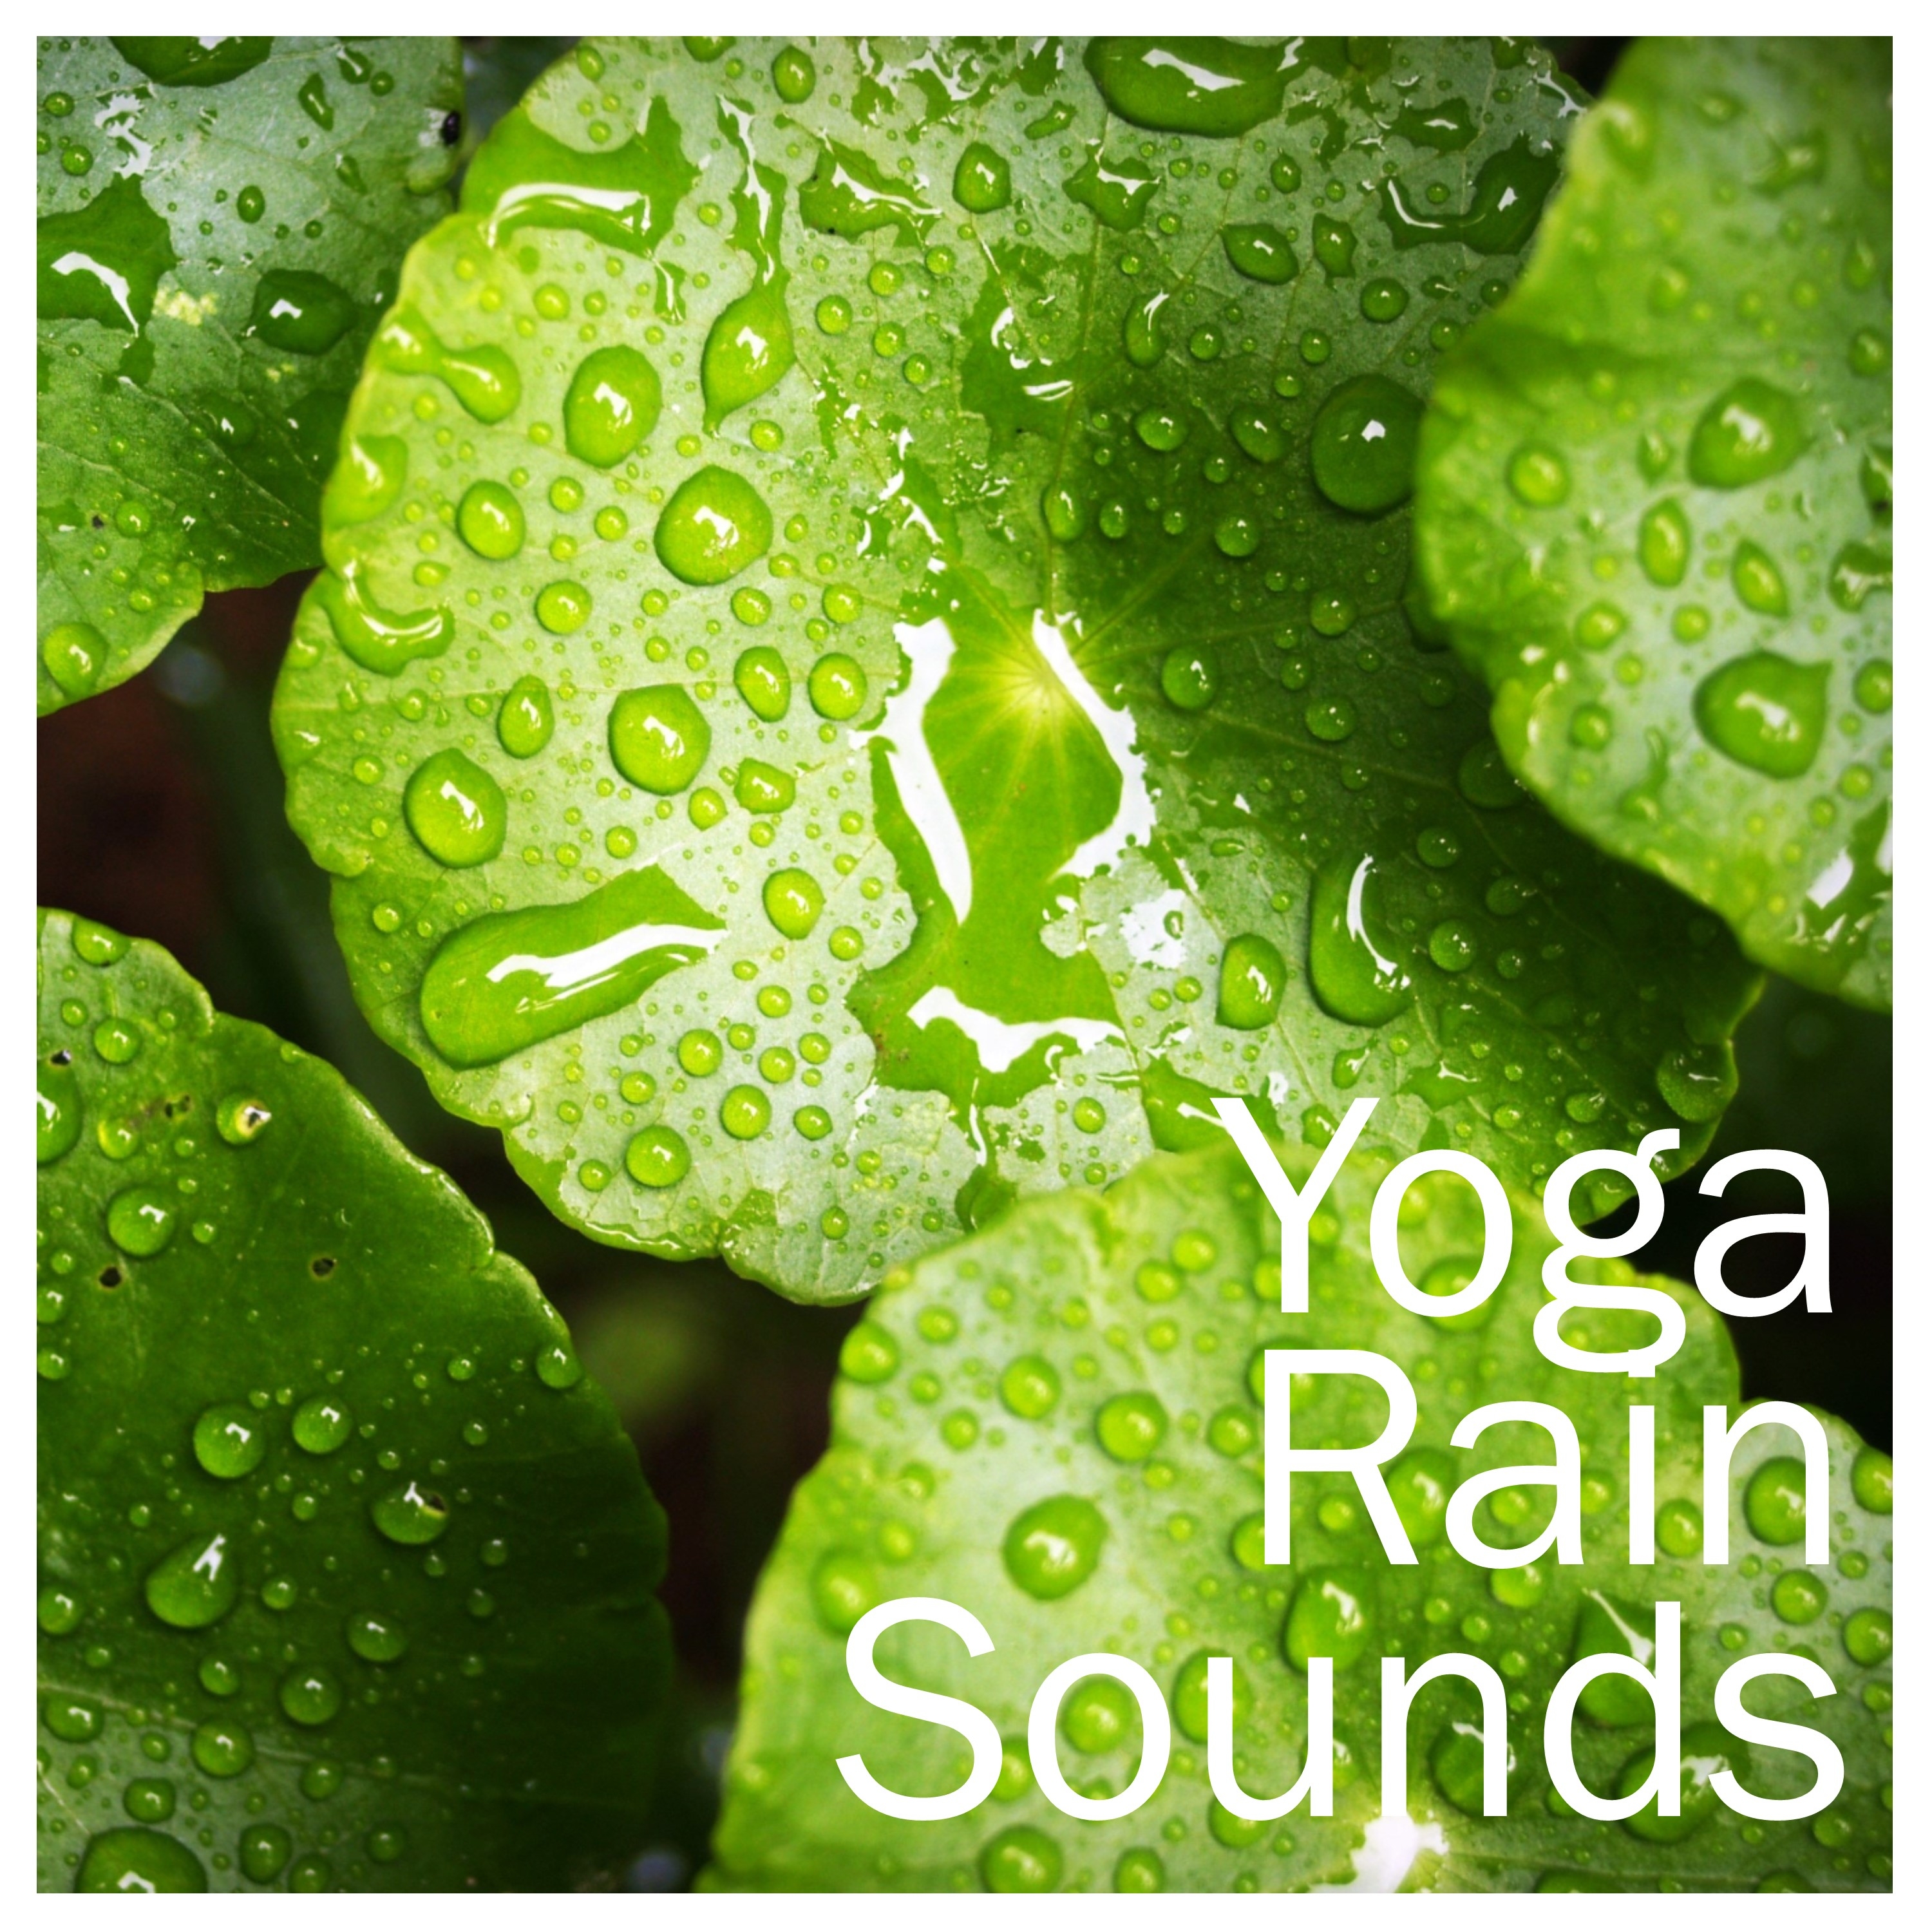 18 Rain Yoga Sounds - Relaxing, Soothing Ambient Music